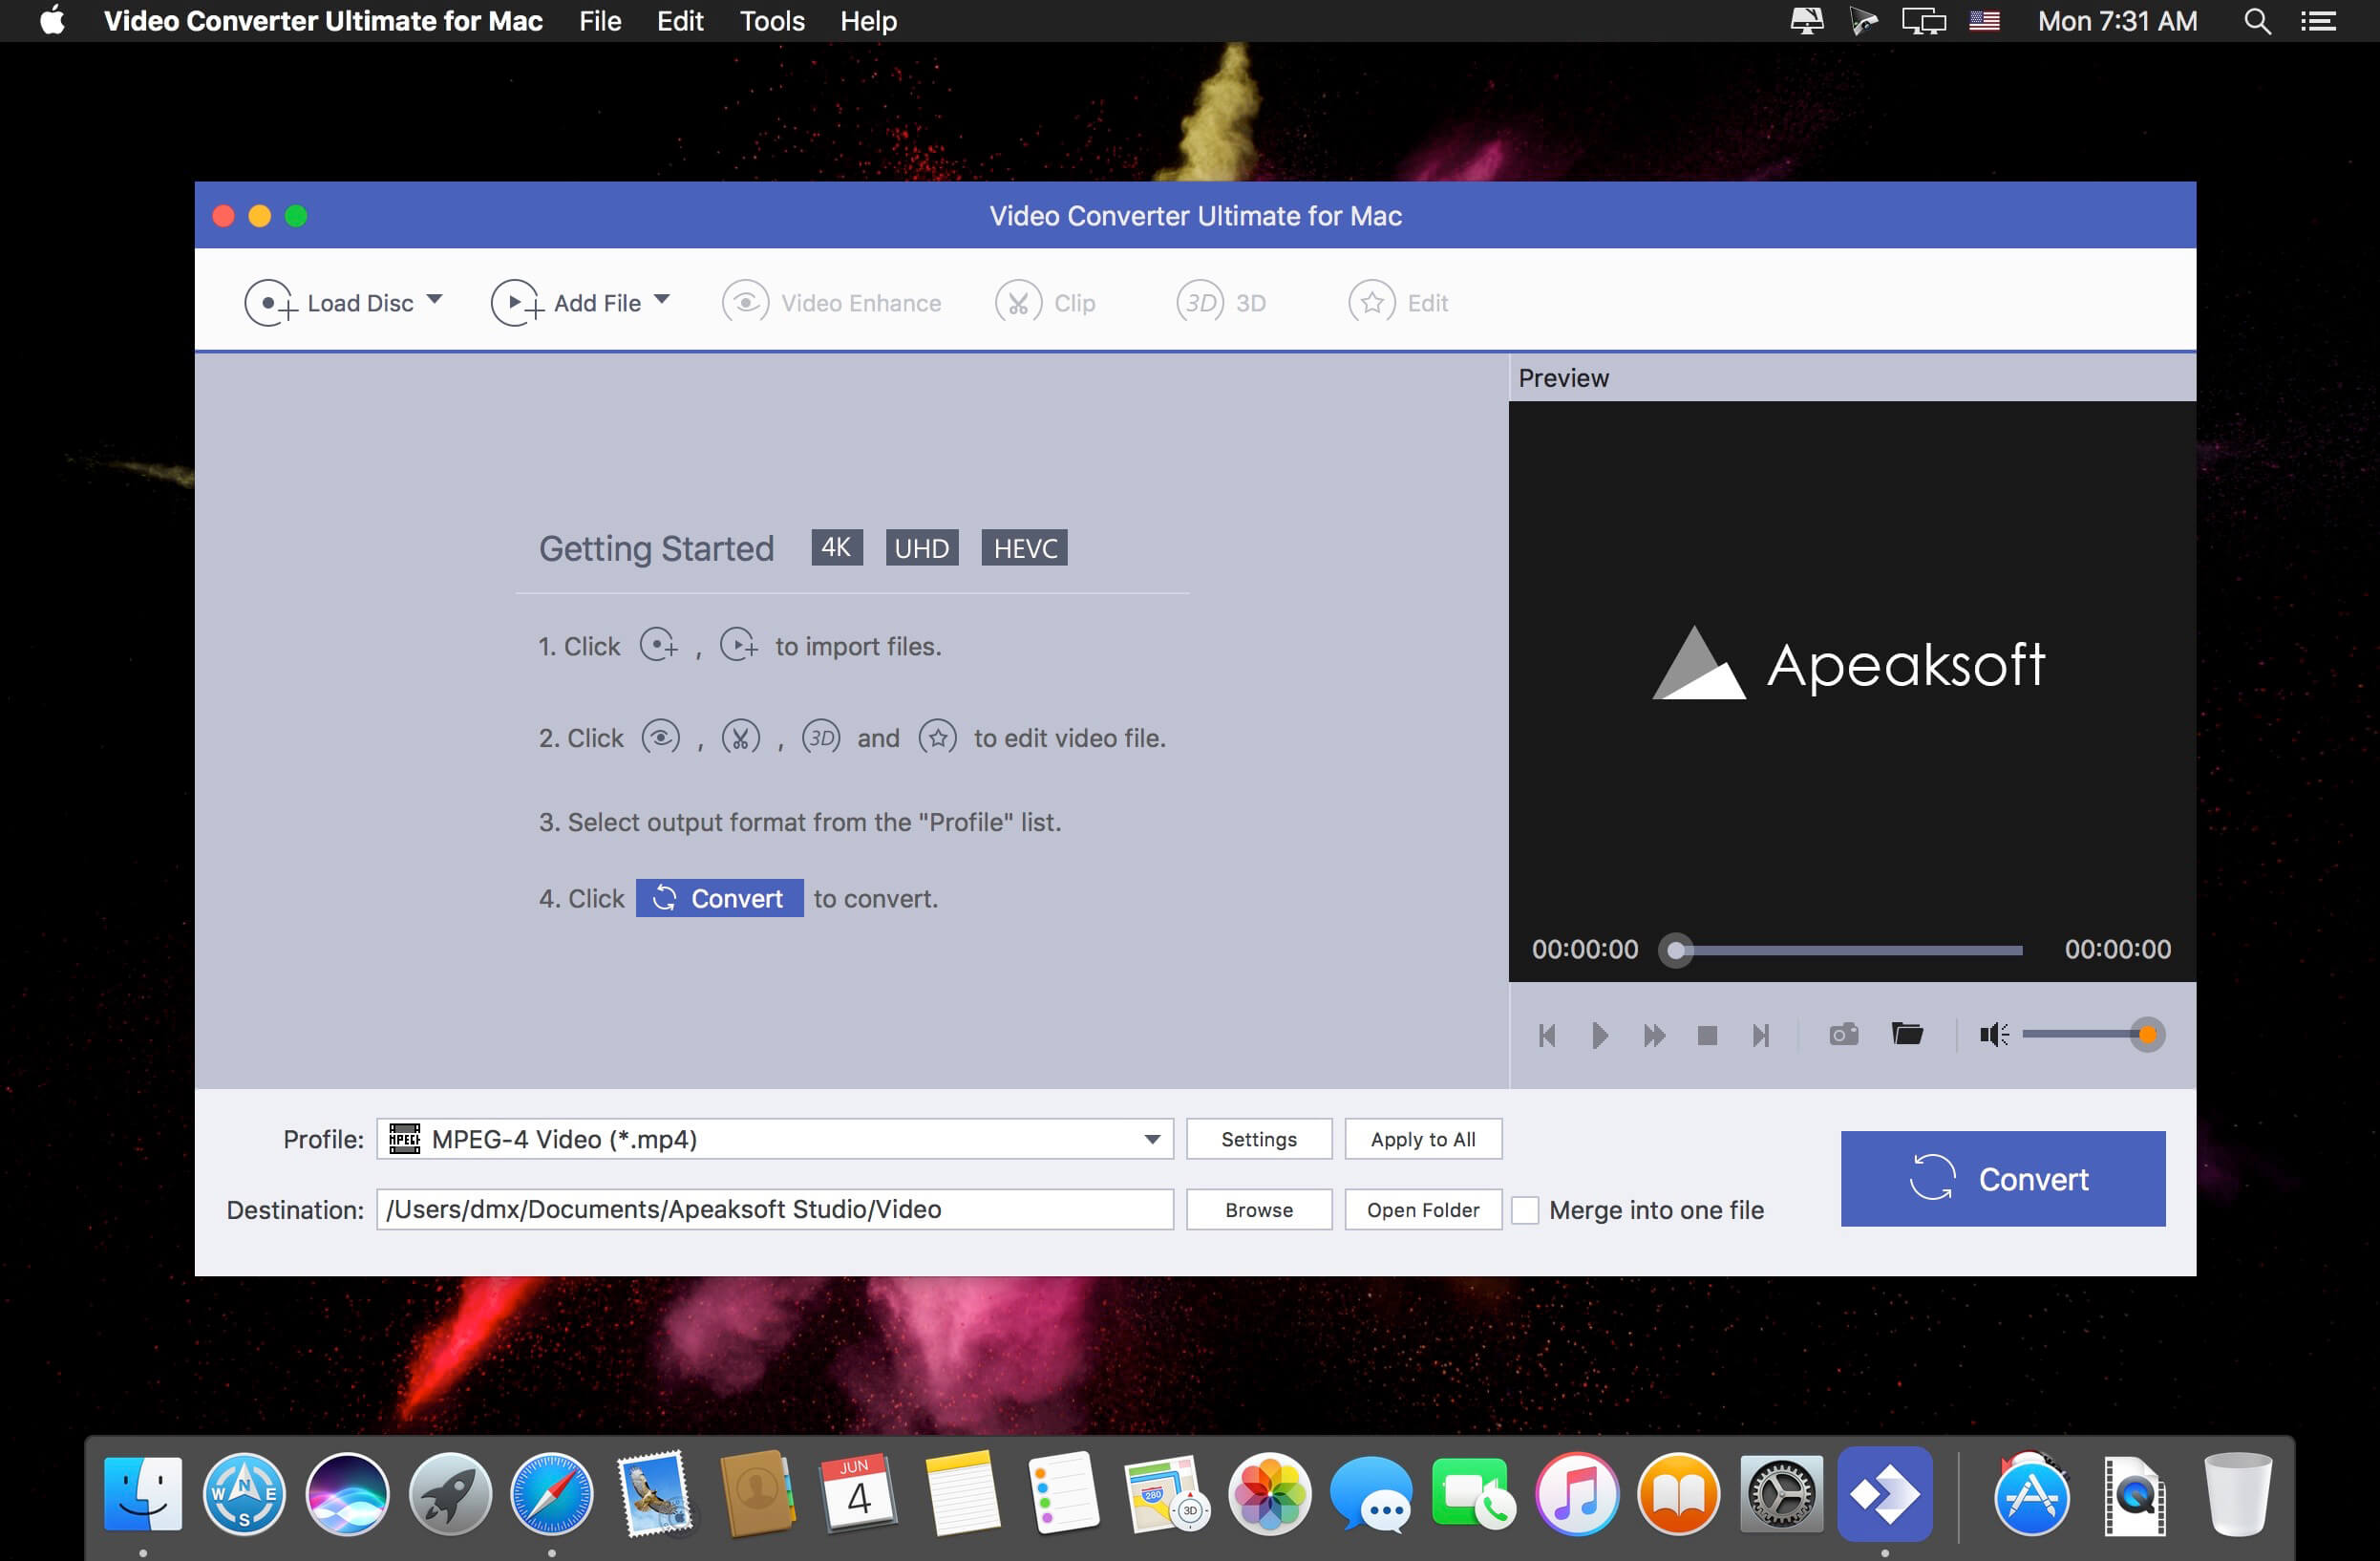 download the new version for android Apeaksoft Studio Video Editor 1.0.38